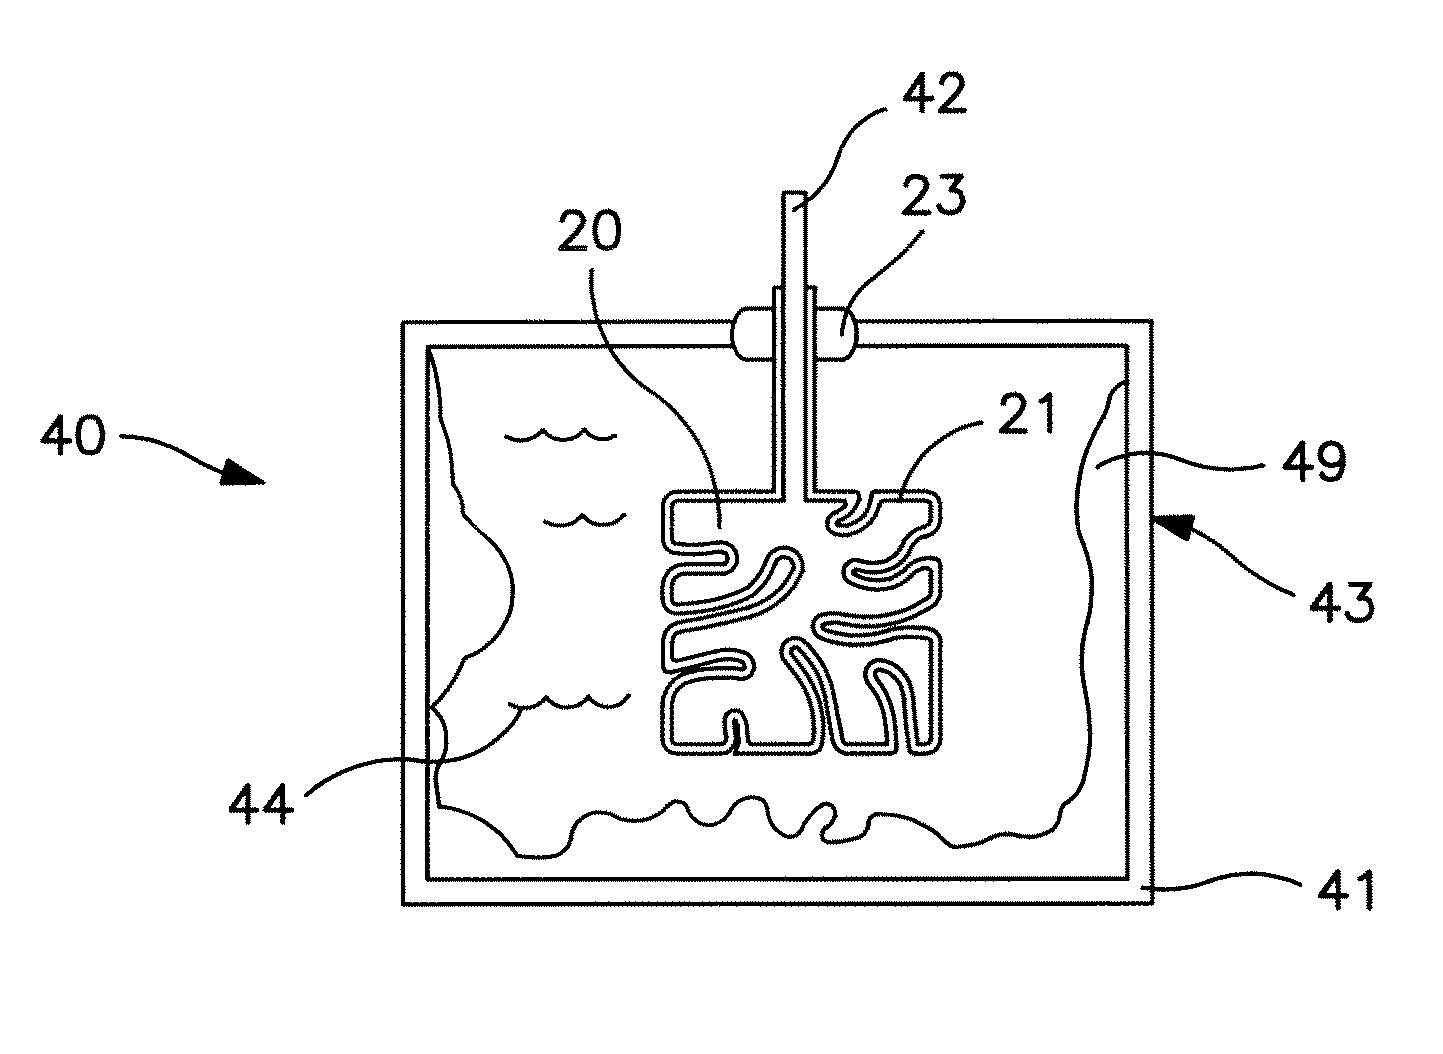 Electrolytic capacitor containing a liquid electrolyte